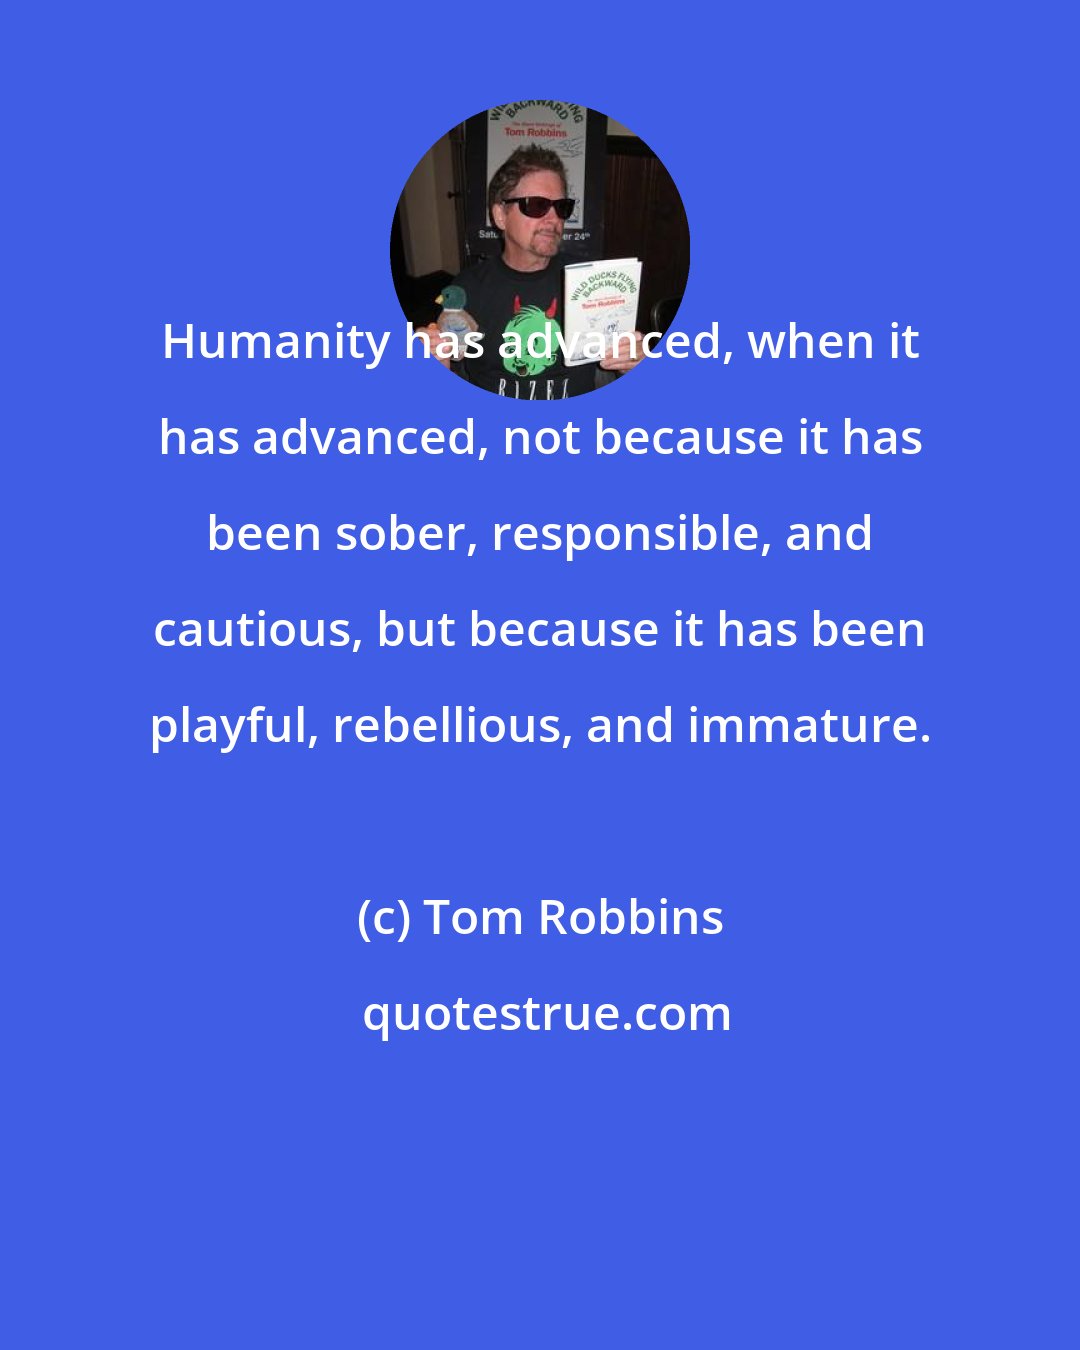 Tom Robbins: Humanity has advanced, when it has advanced, not because it has been sober, responsible, and cautious, but because it has been playful, rebellious, and immature.